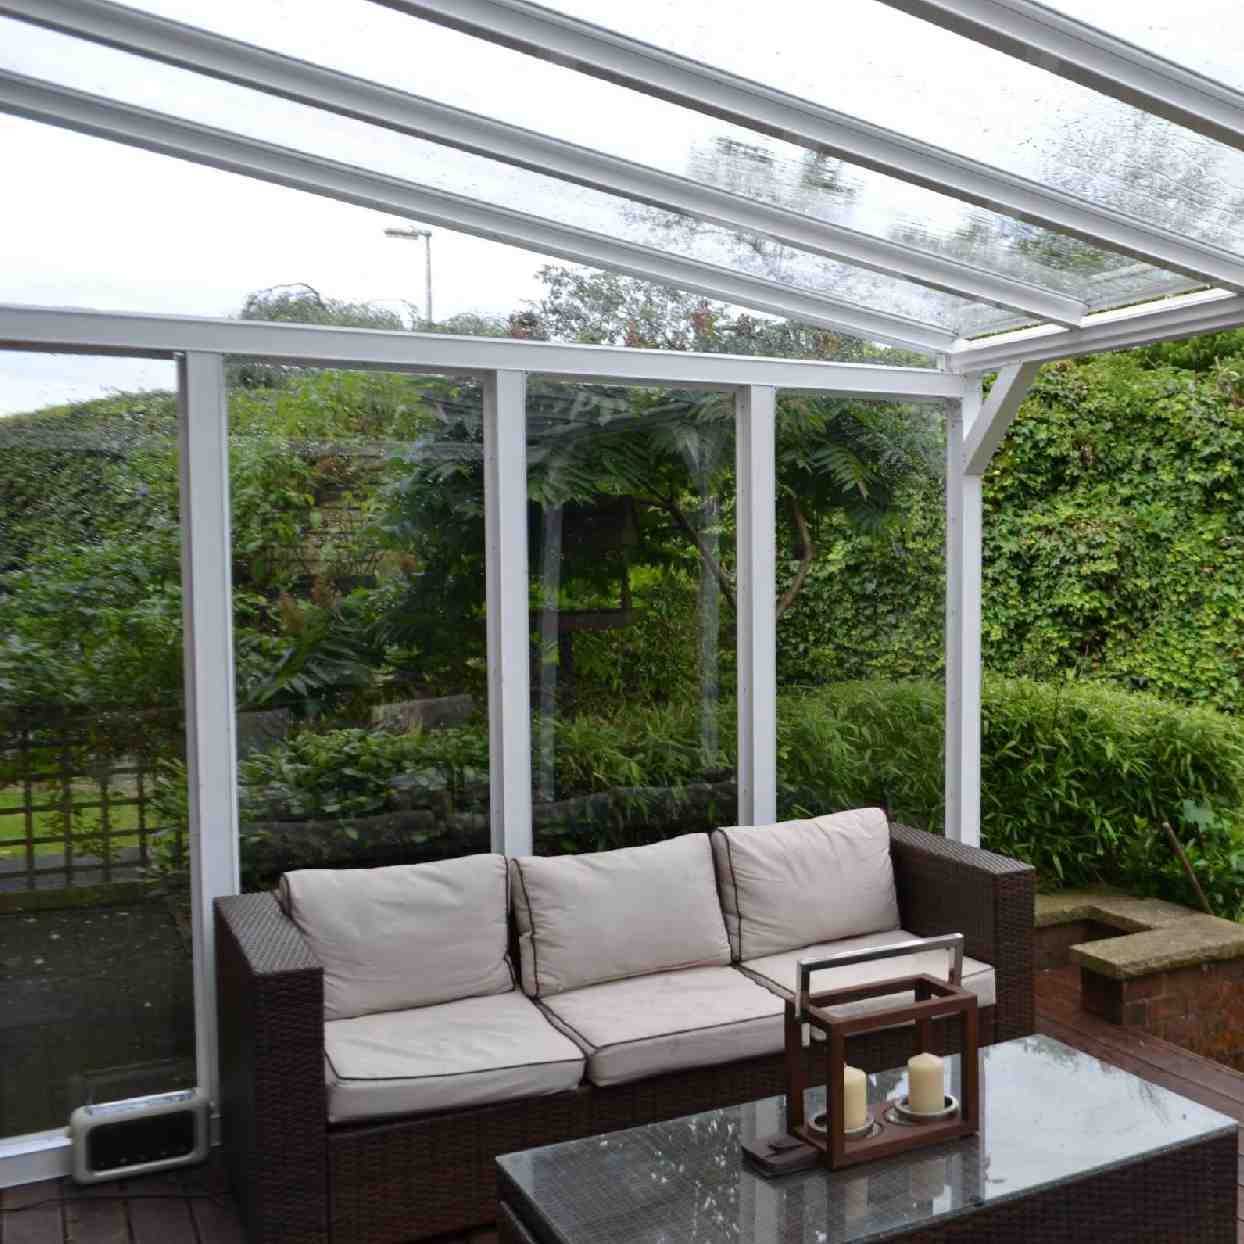 Buy Omega Verandah White with 16mm Polycarbonate Glazing - 6.3m (W) x 2.5m (P), (4) Supporting Posts online today